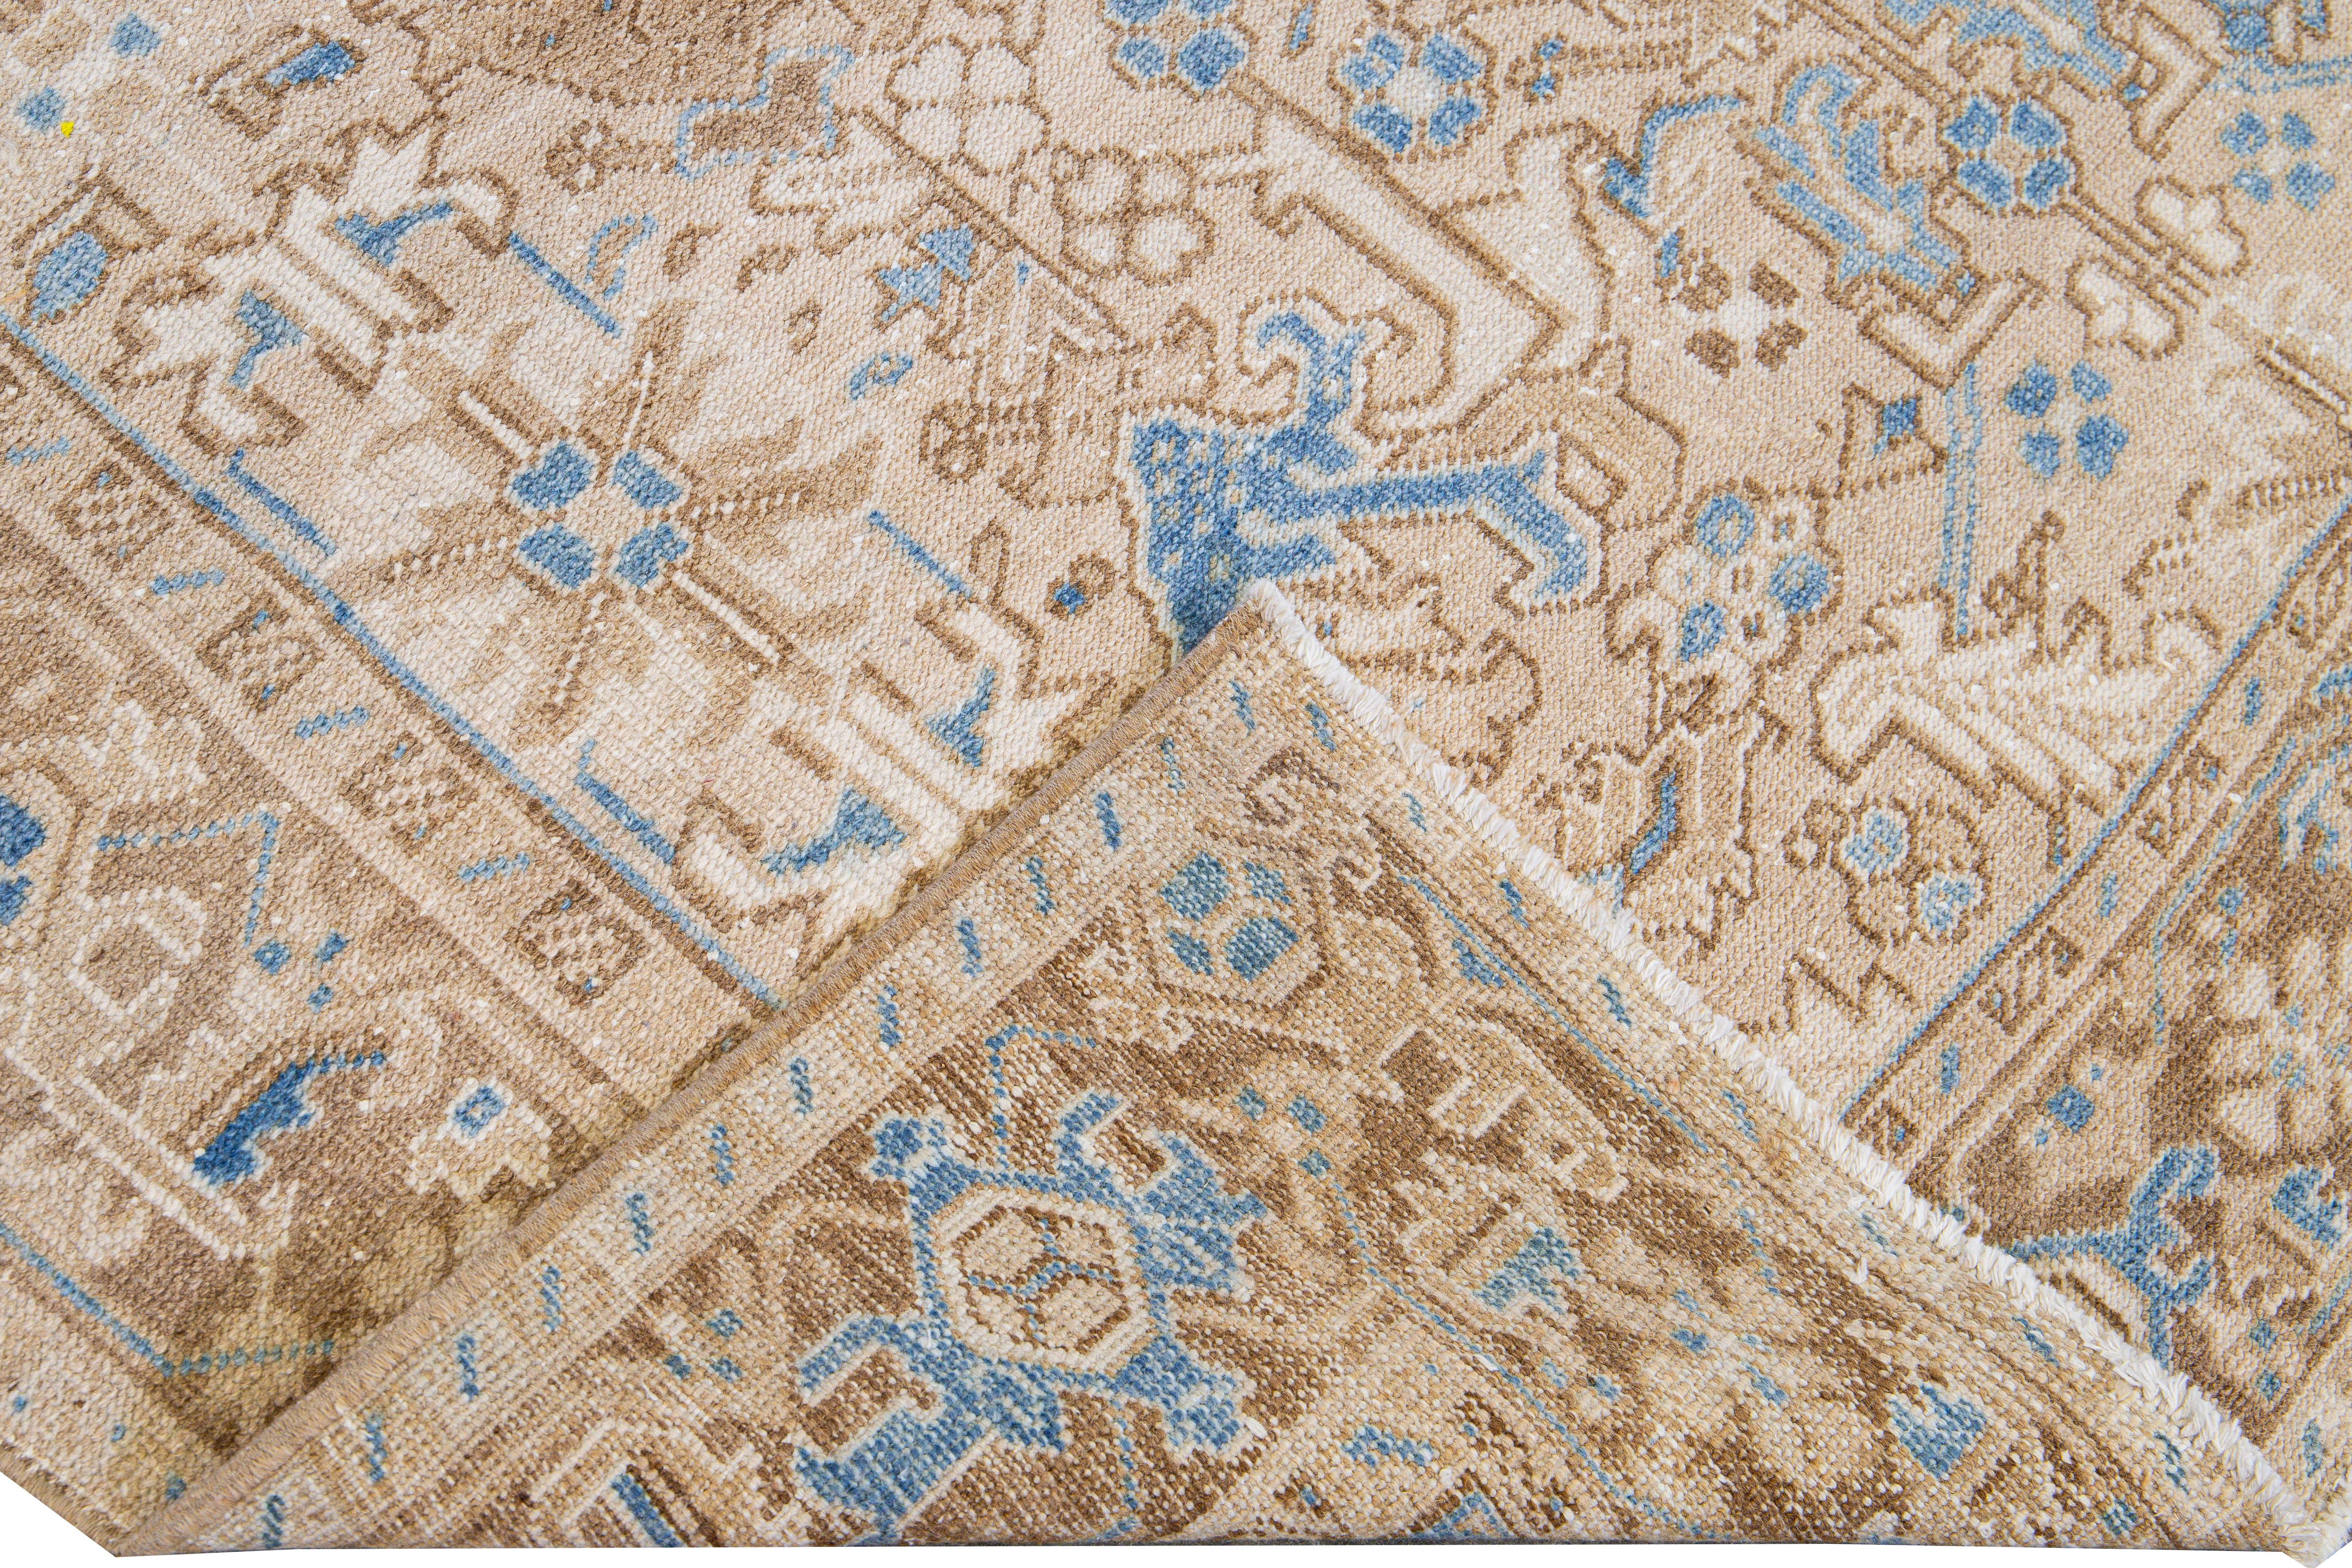 Beautiful antique Heriz hand-knotted wool rug with a beige field. This Persian rug has a blue and brown accent that featuring an all-over geometric floral pattern design.

This rug measures: 6'8